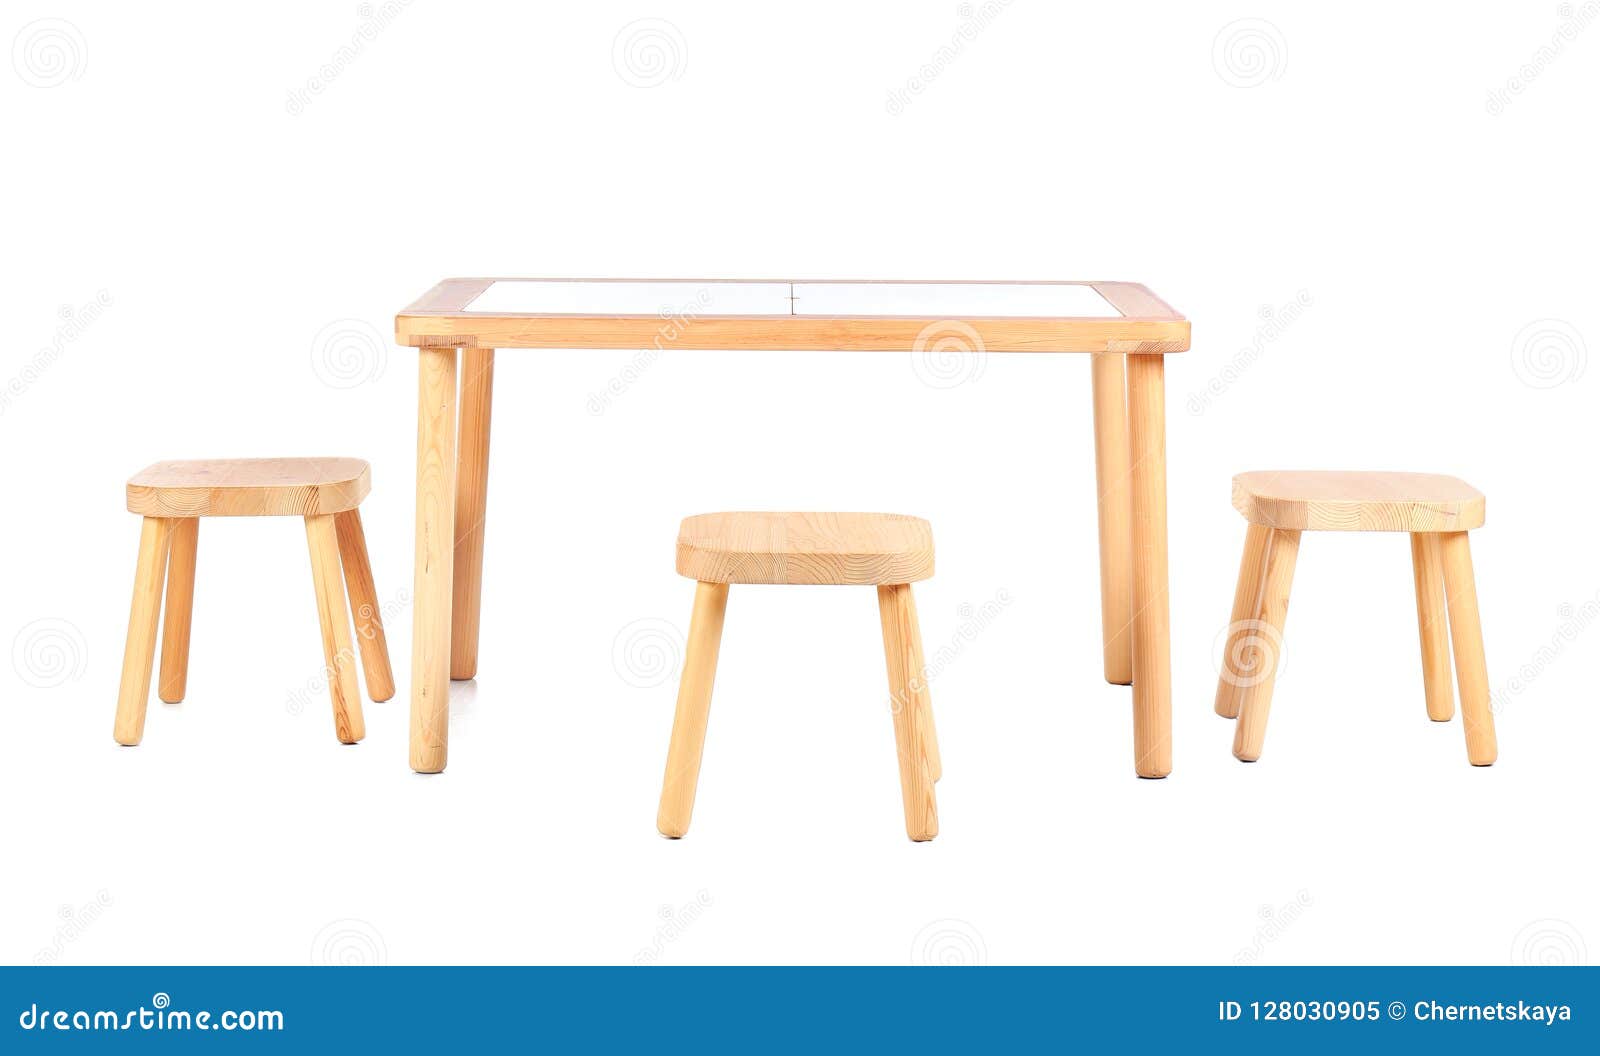 Small Table And Chairs For Little Kids Stock Image Image Of Furniture